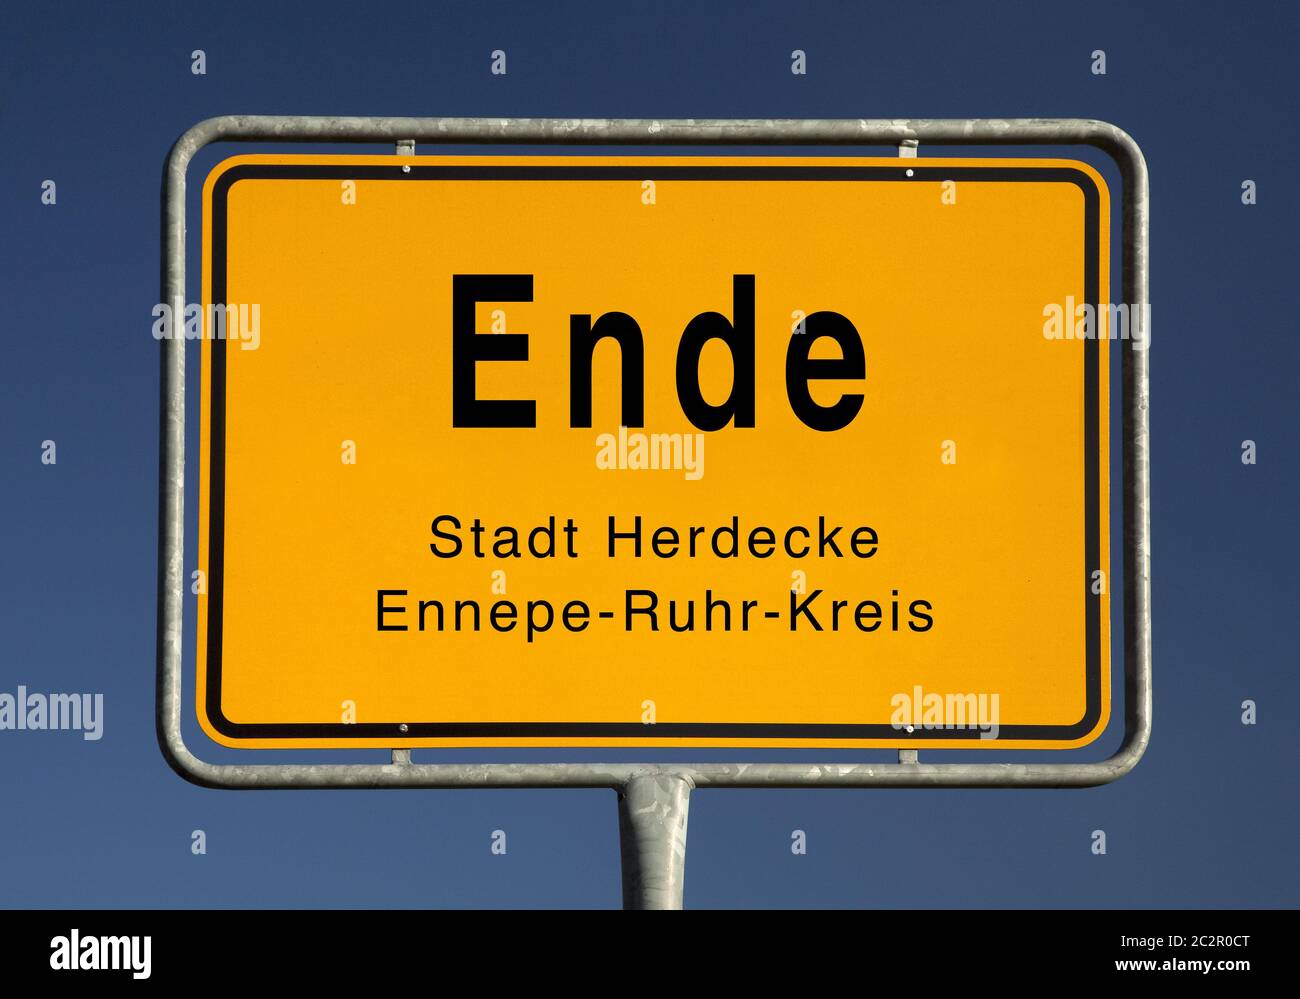 City limits sign of Ende, district Herdecke, Ennepe-Ruhr district, North Rhine-Westphalia, Germany Stock Photo